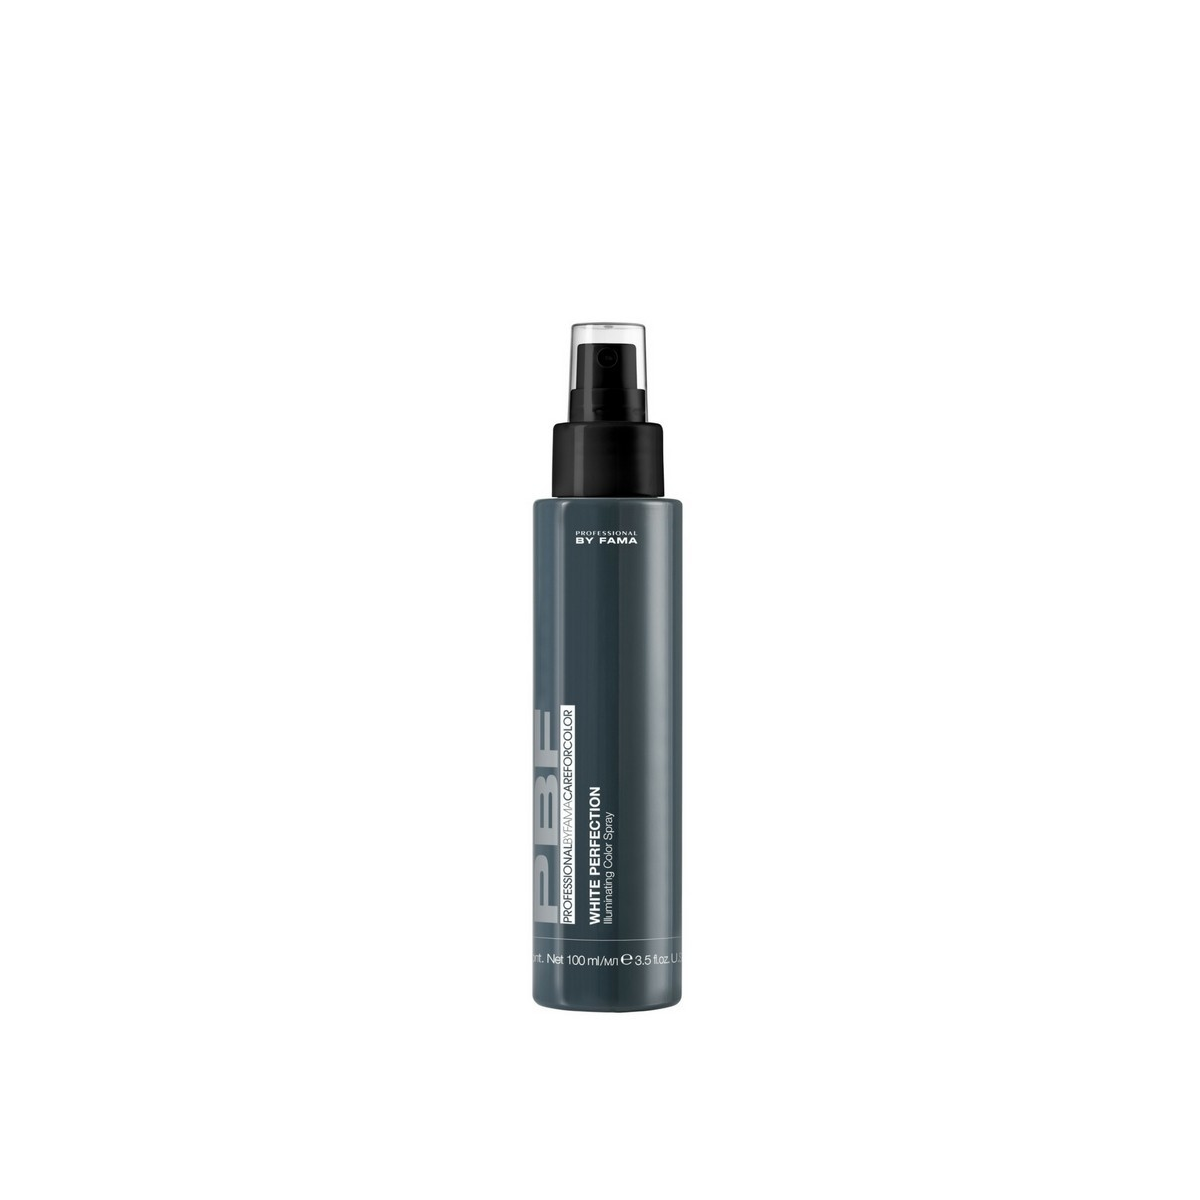 PROFESSIONAL BY FAMA - PBF - CARE FOR COLOR - WHITE PERFECTION (100ml) Spray